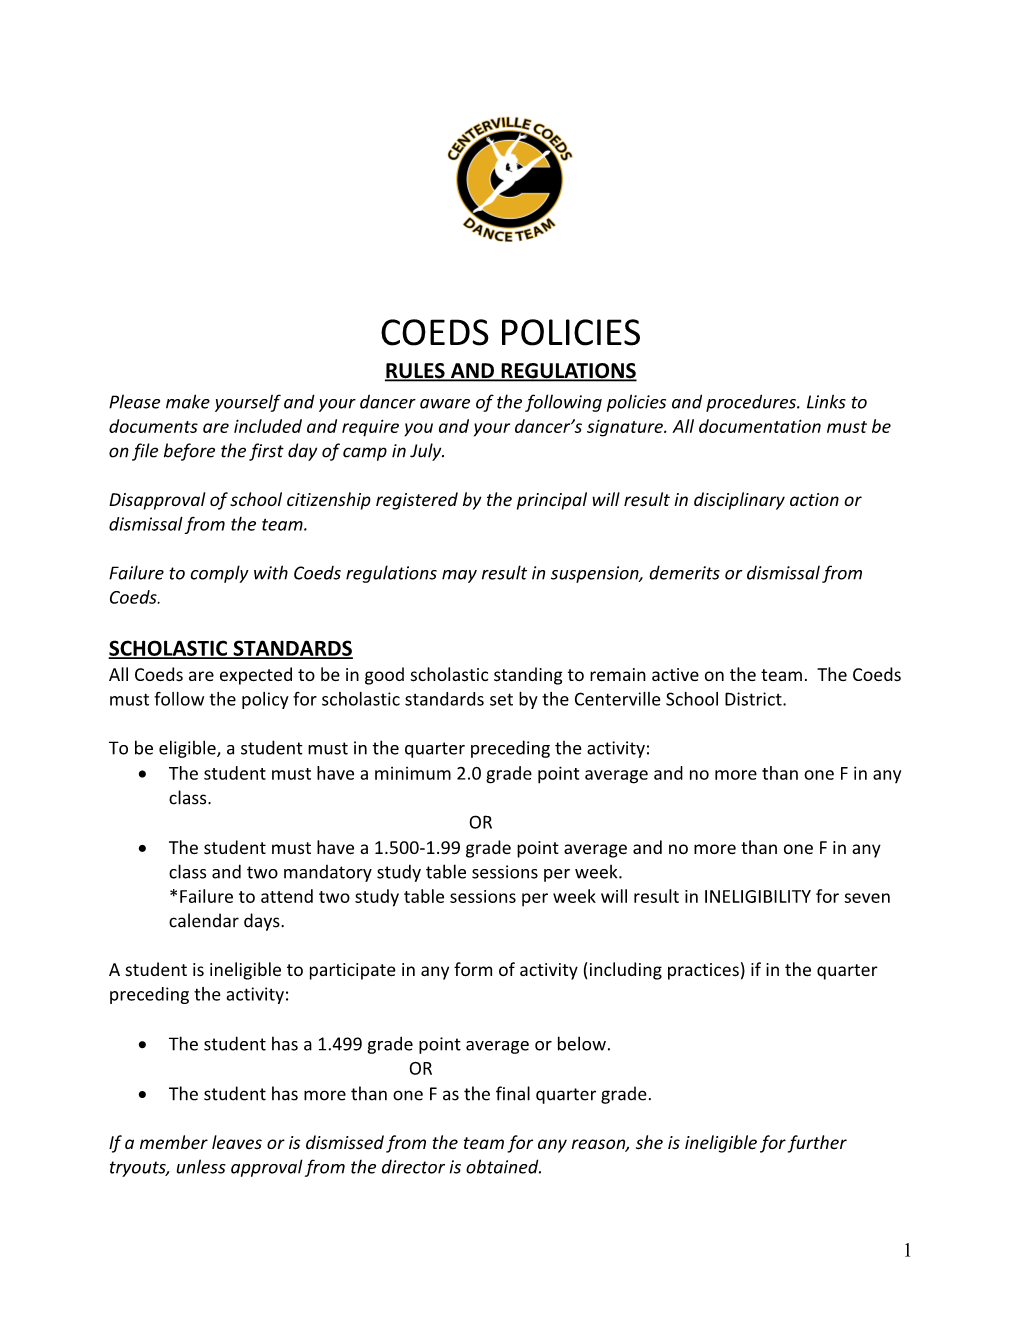 Coeds Policies Rules and Regulations